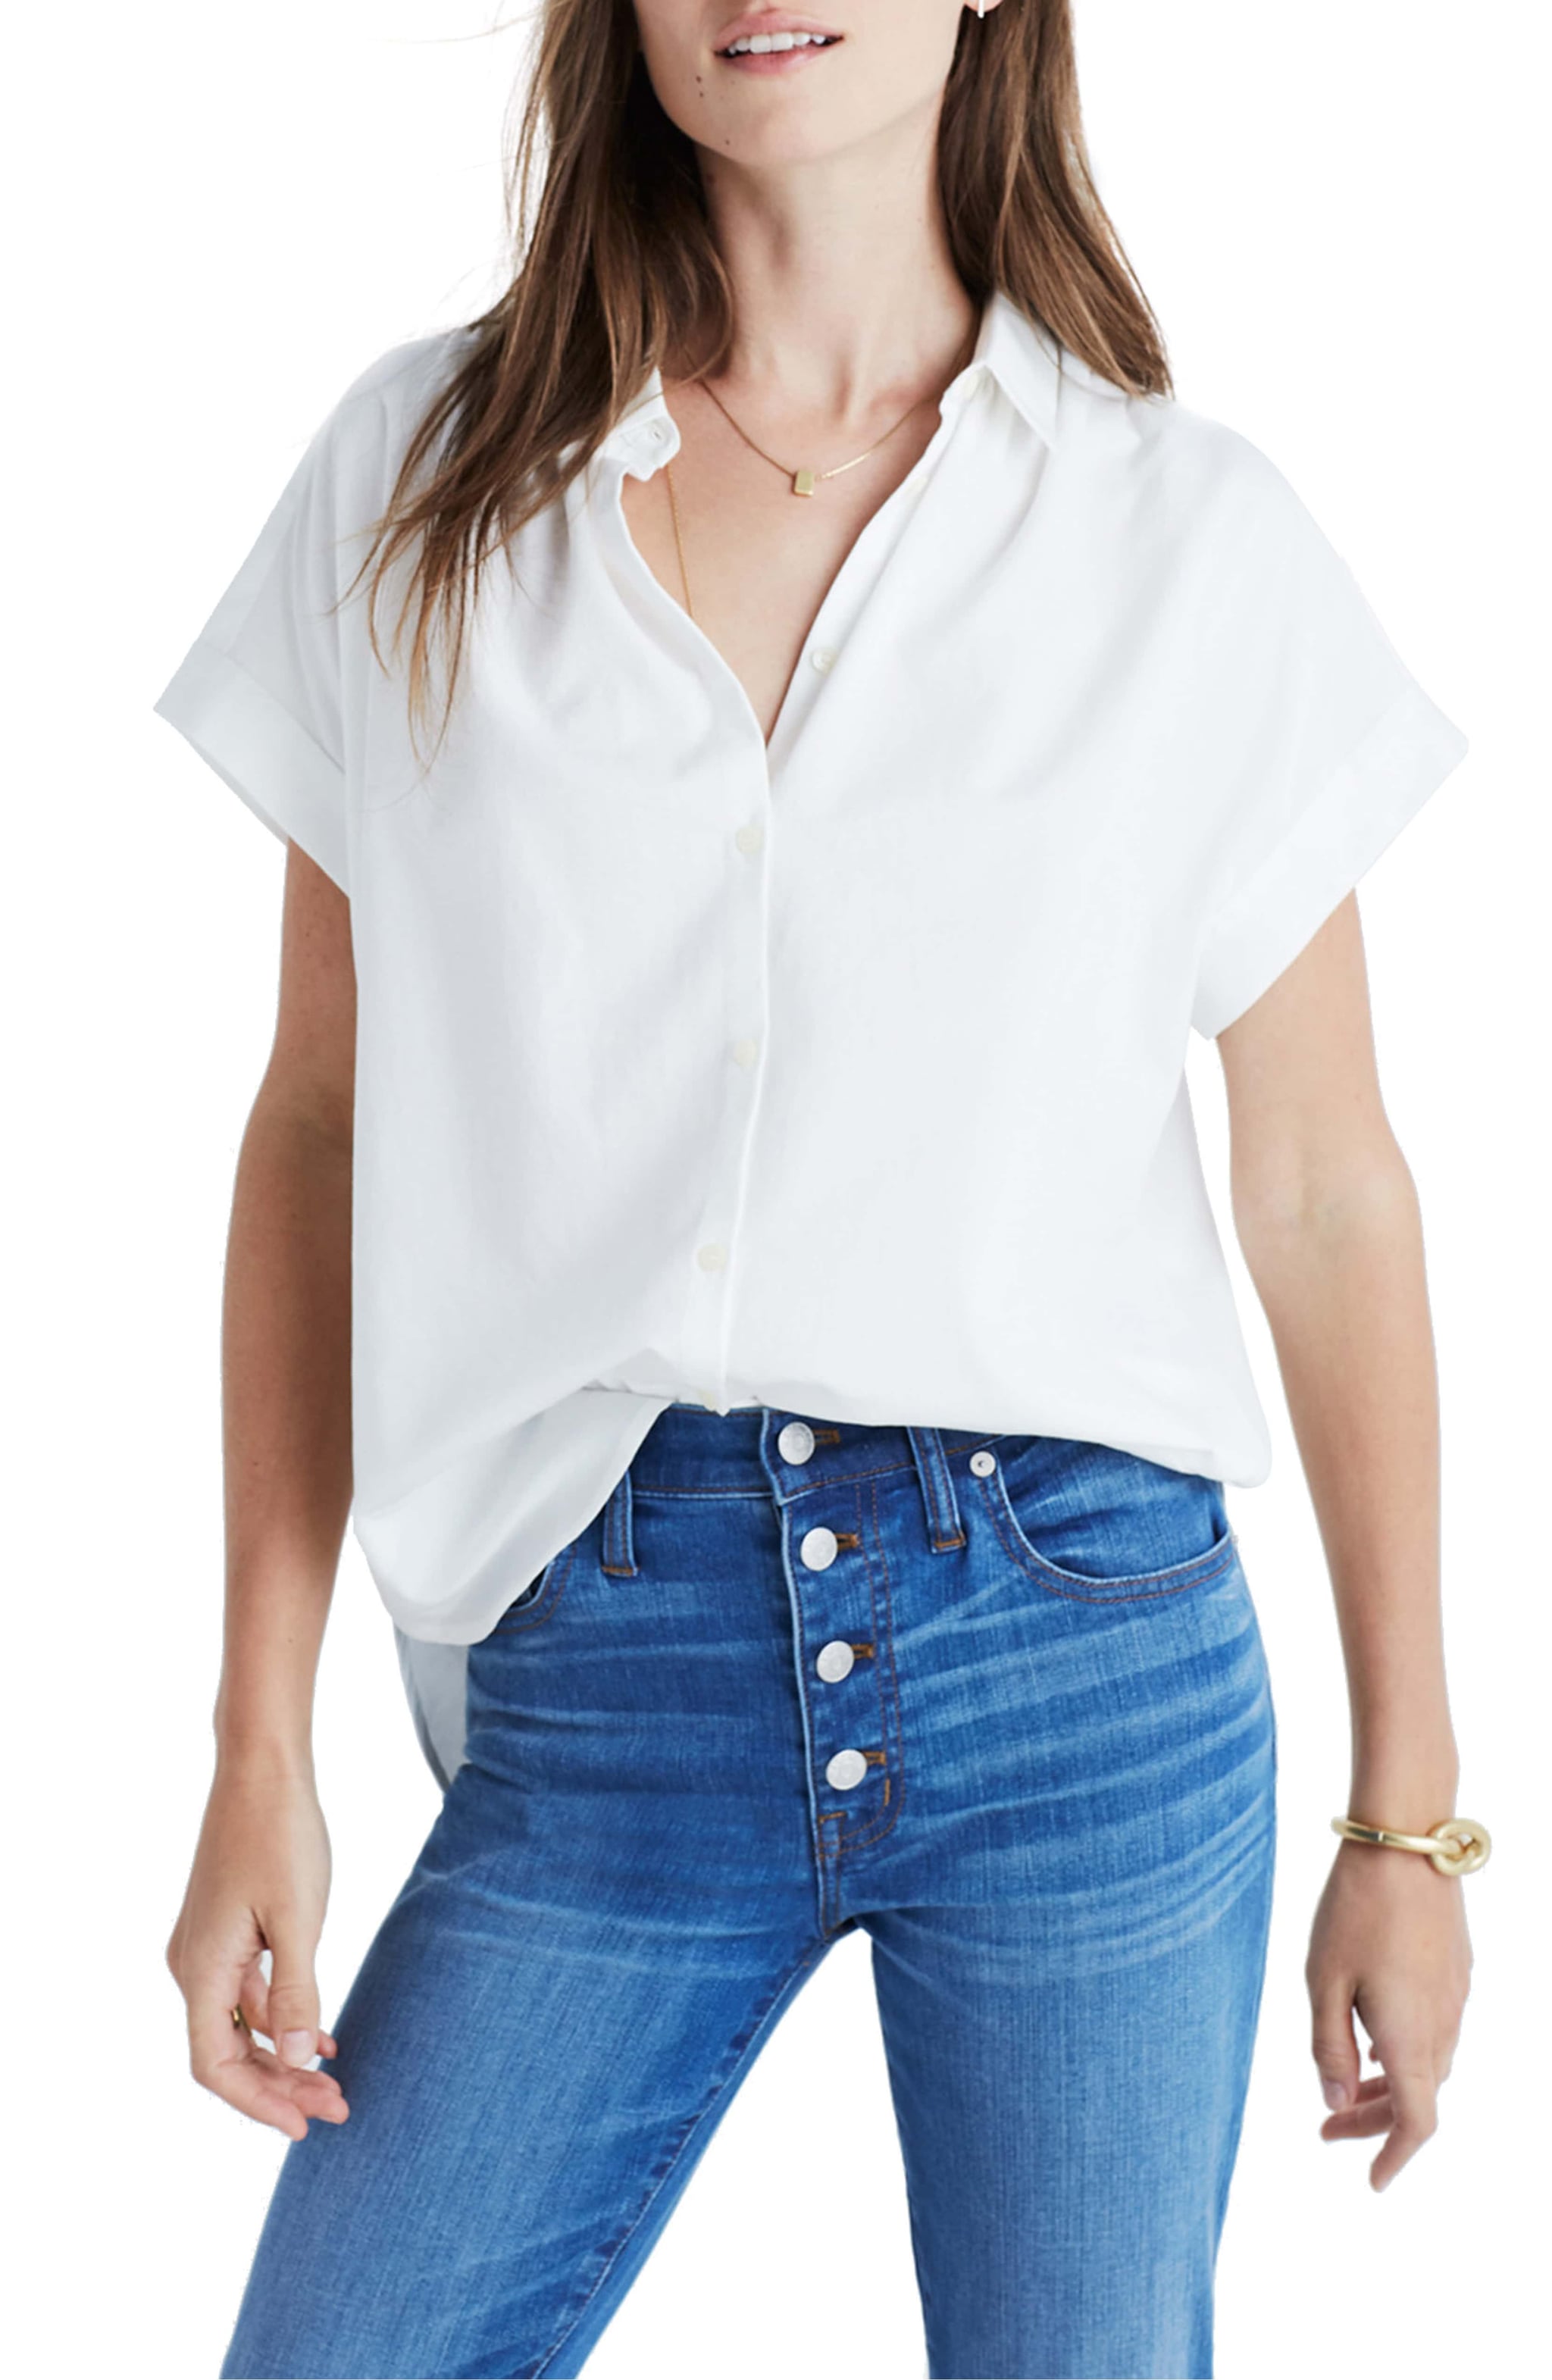 nordstrom madewell white jeans